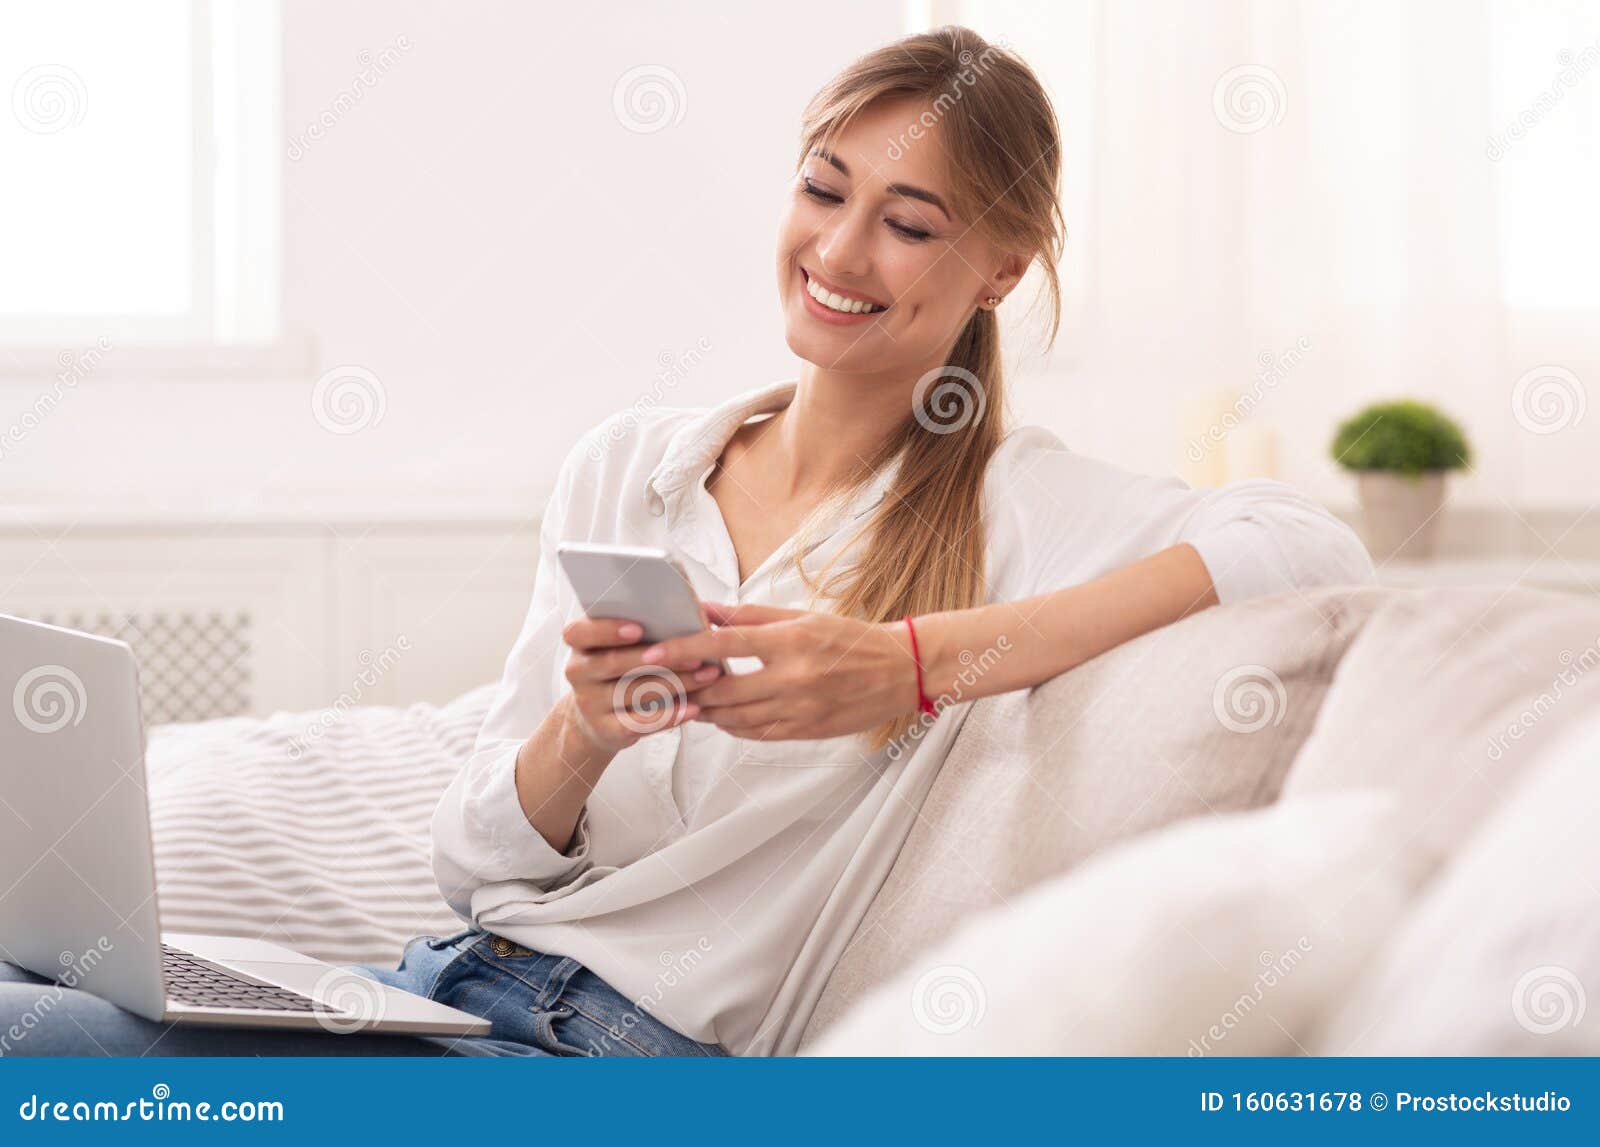 Lady Using Cellpone and Laptop Relaxing on Couch at Home Stock Photo ...